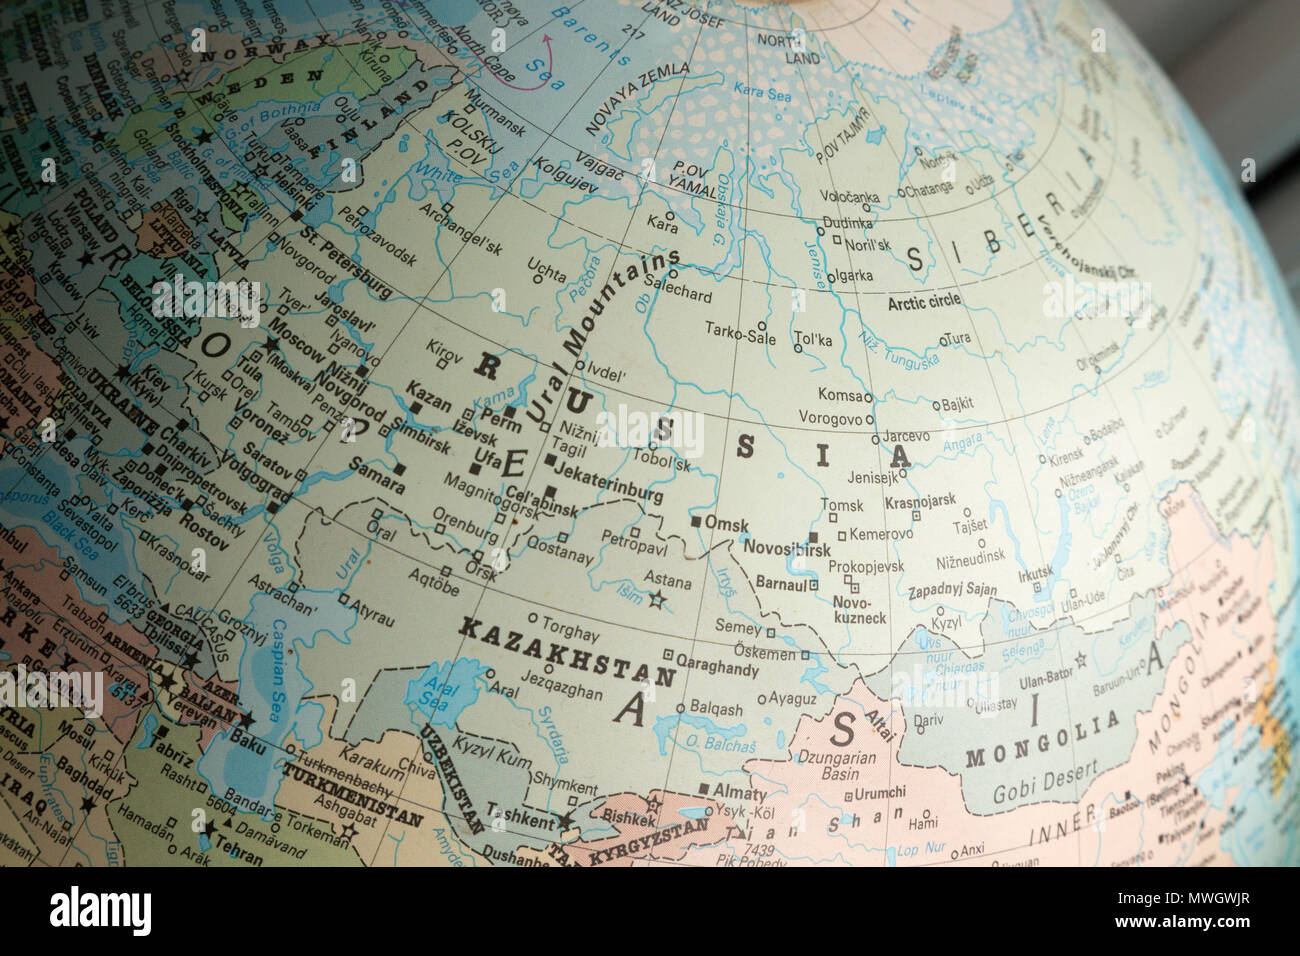 Eastern Europe and Asia map on a globe focused on Russia Stock Photo